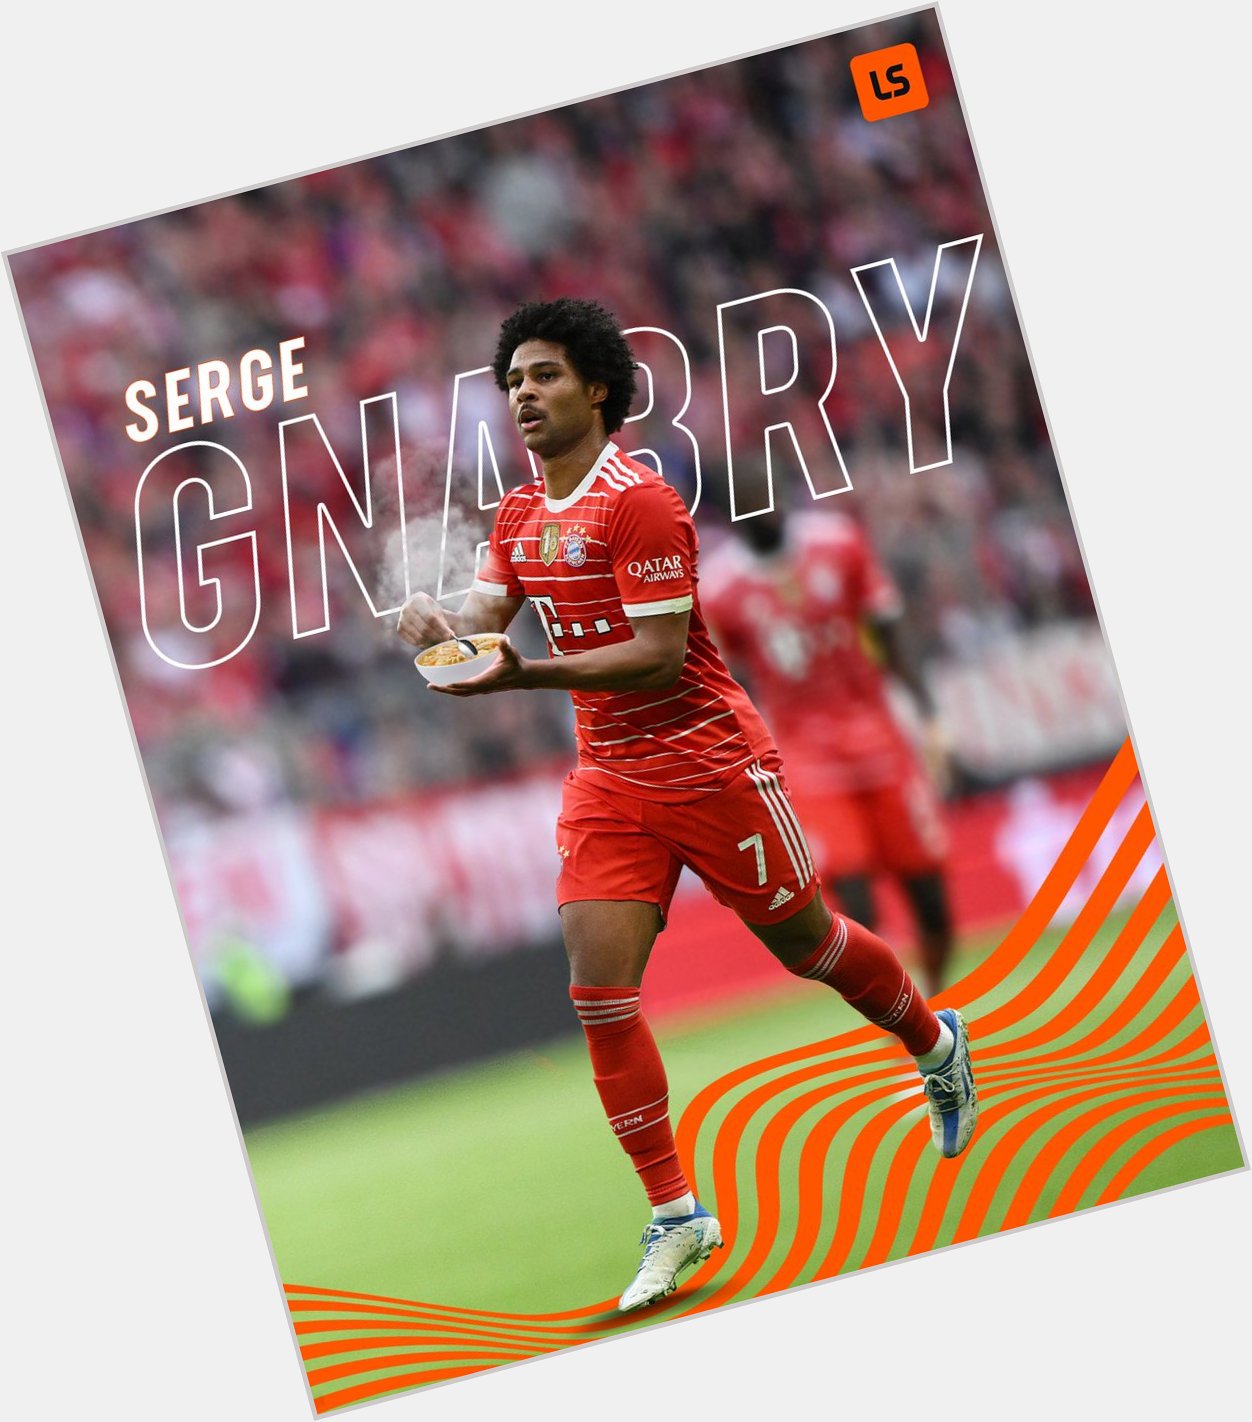 Happy birthday Serge Gnabry! Who will he be cooking for next season? 